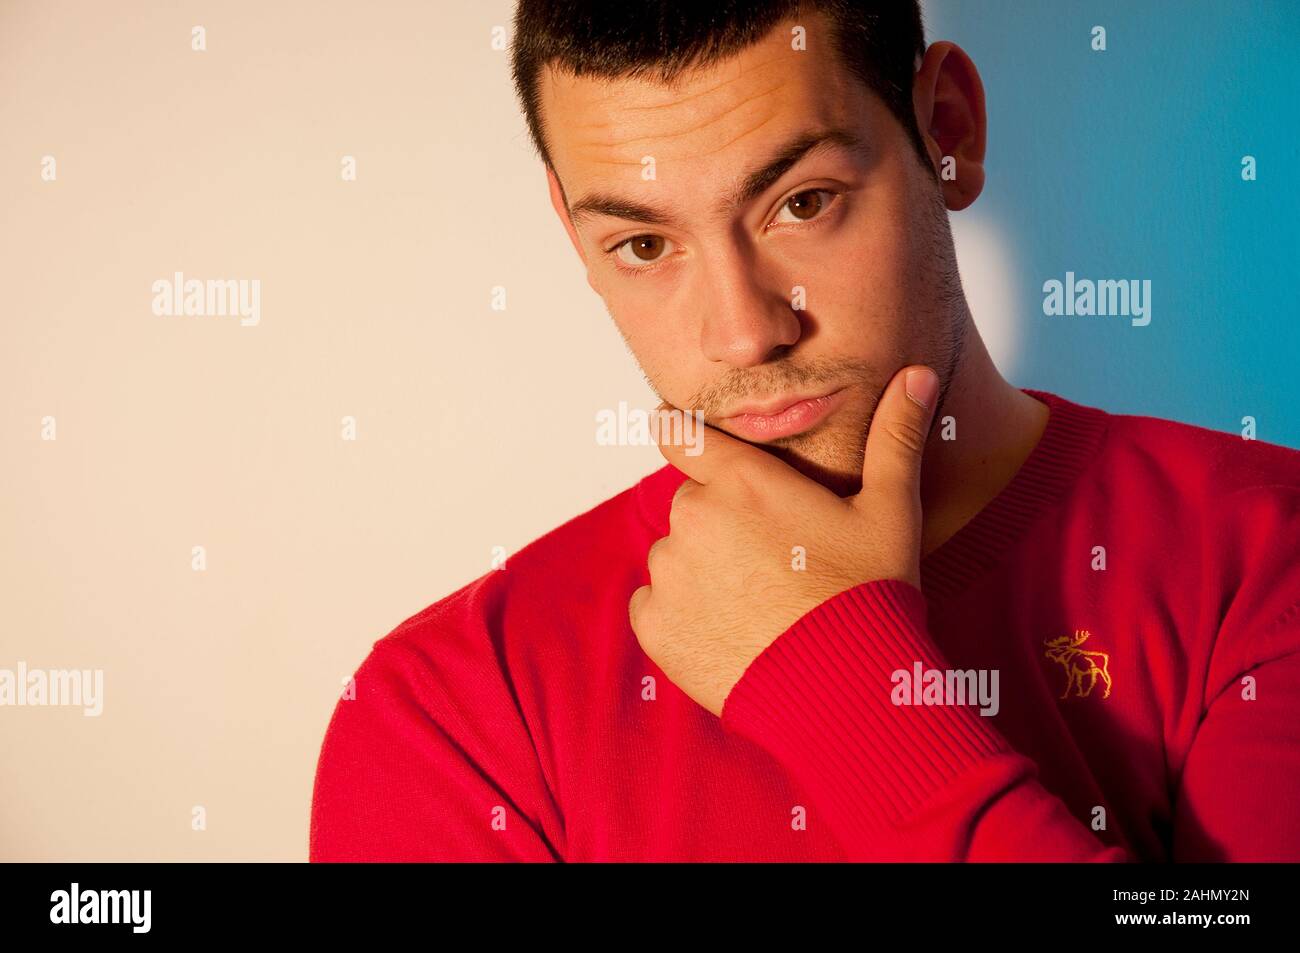 Young man, hand on chin, looking camera. Close view. Stock Photo